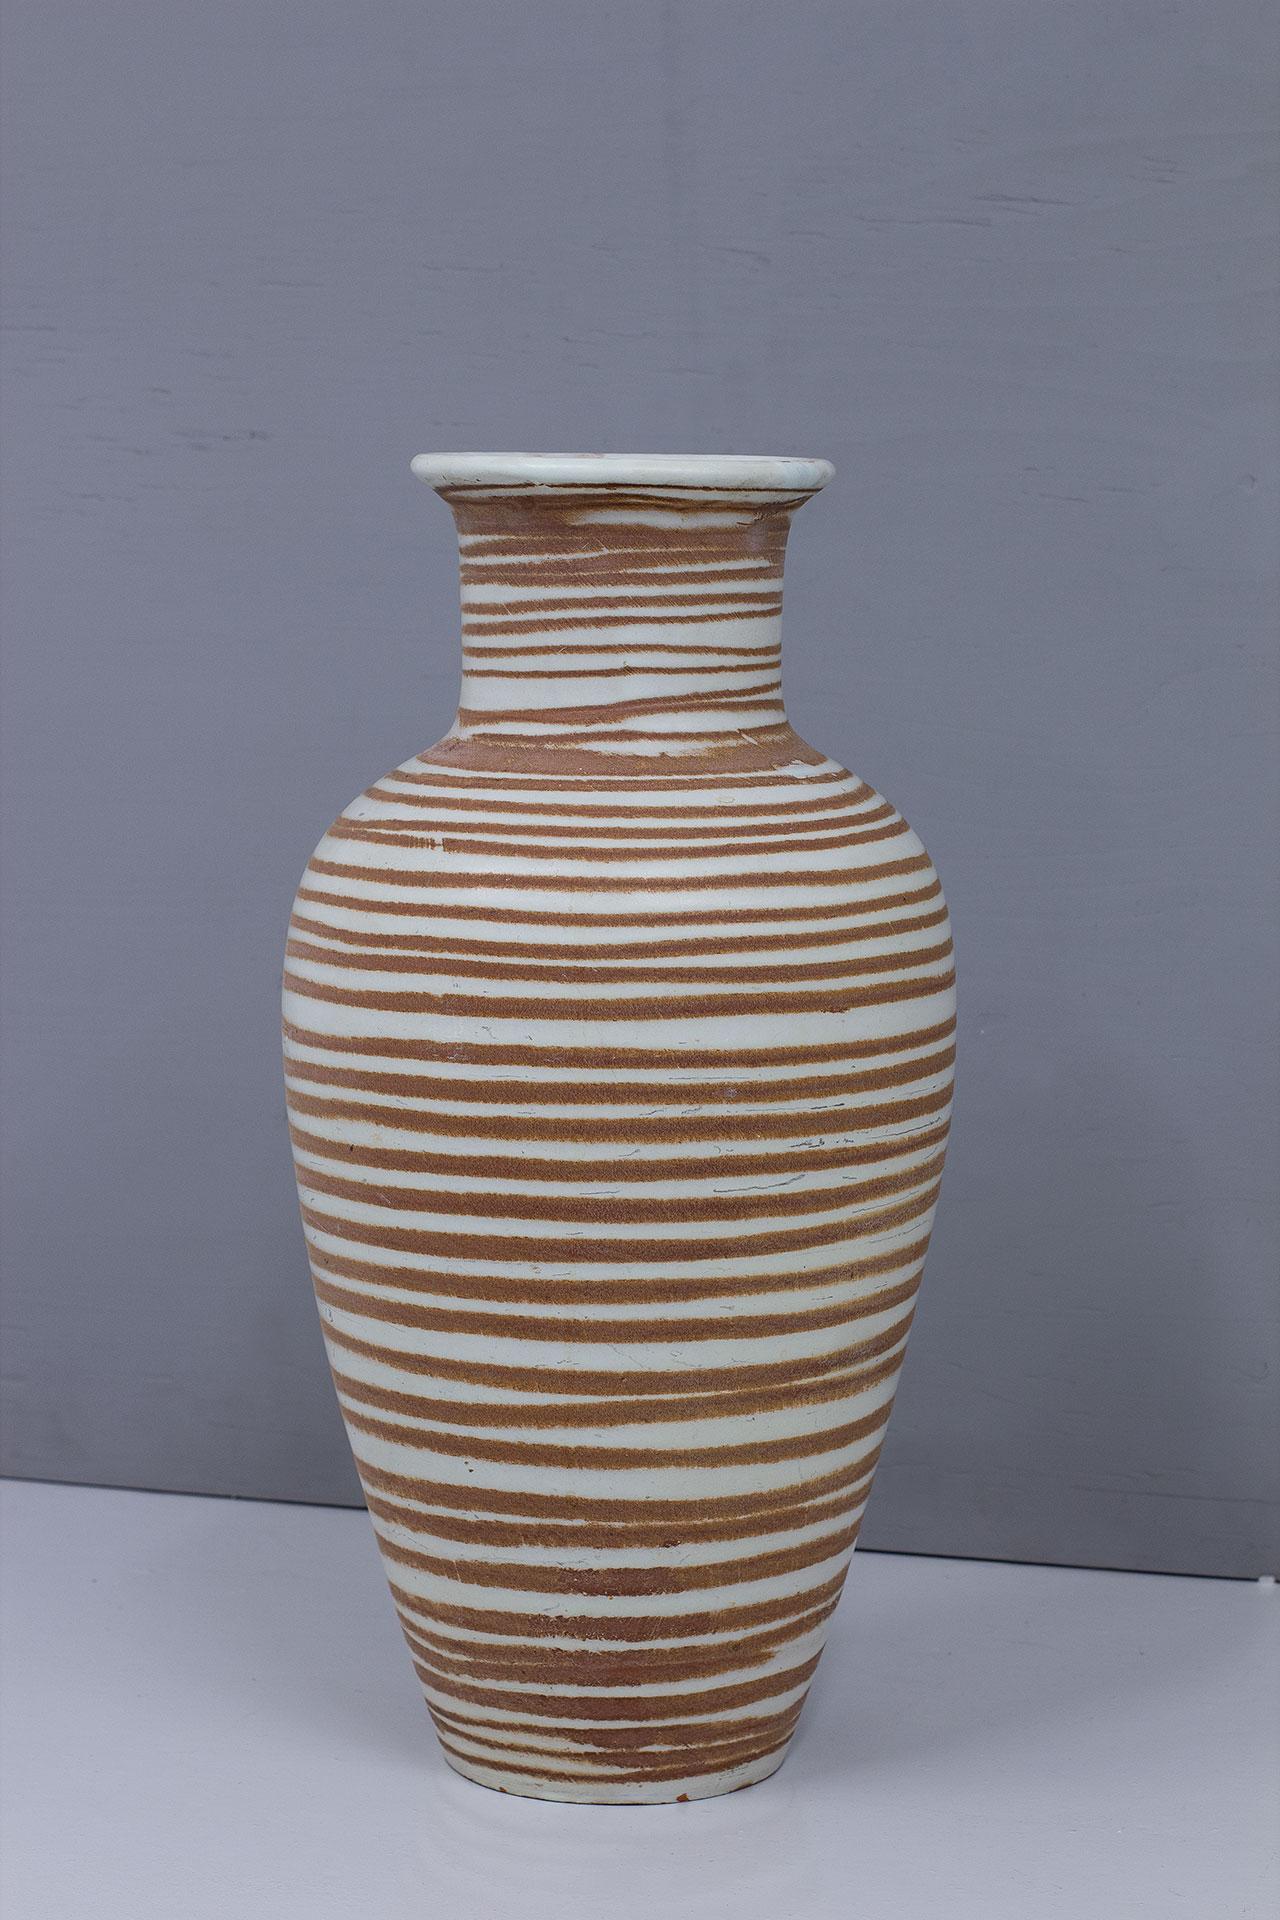 Large Swedish ceramic floor vase designed by Anna-Lisa Thomson.
Manufactured by Upsala-Ekeby in Uppsala, Sweden circa 1940s.
The vase is made from glazed earthenware with a hand drawn spiral pattern.
Impressed on the bottom: “EKEBY – 16 –